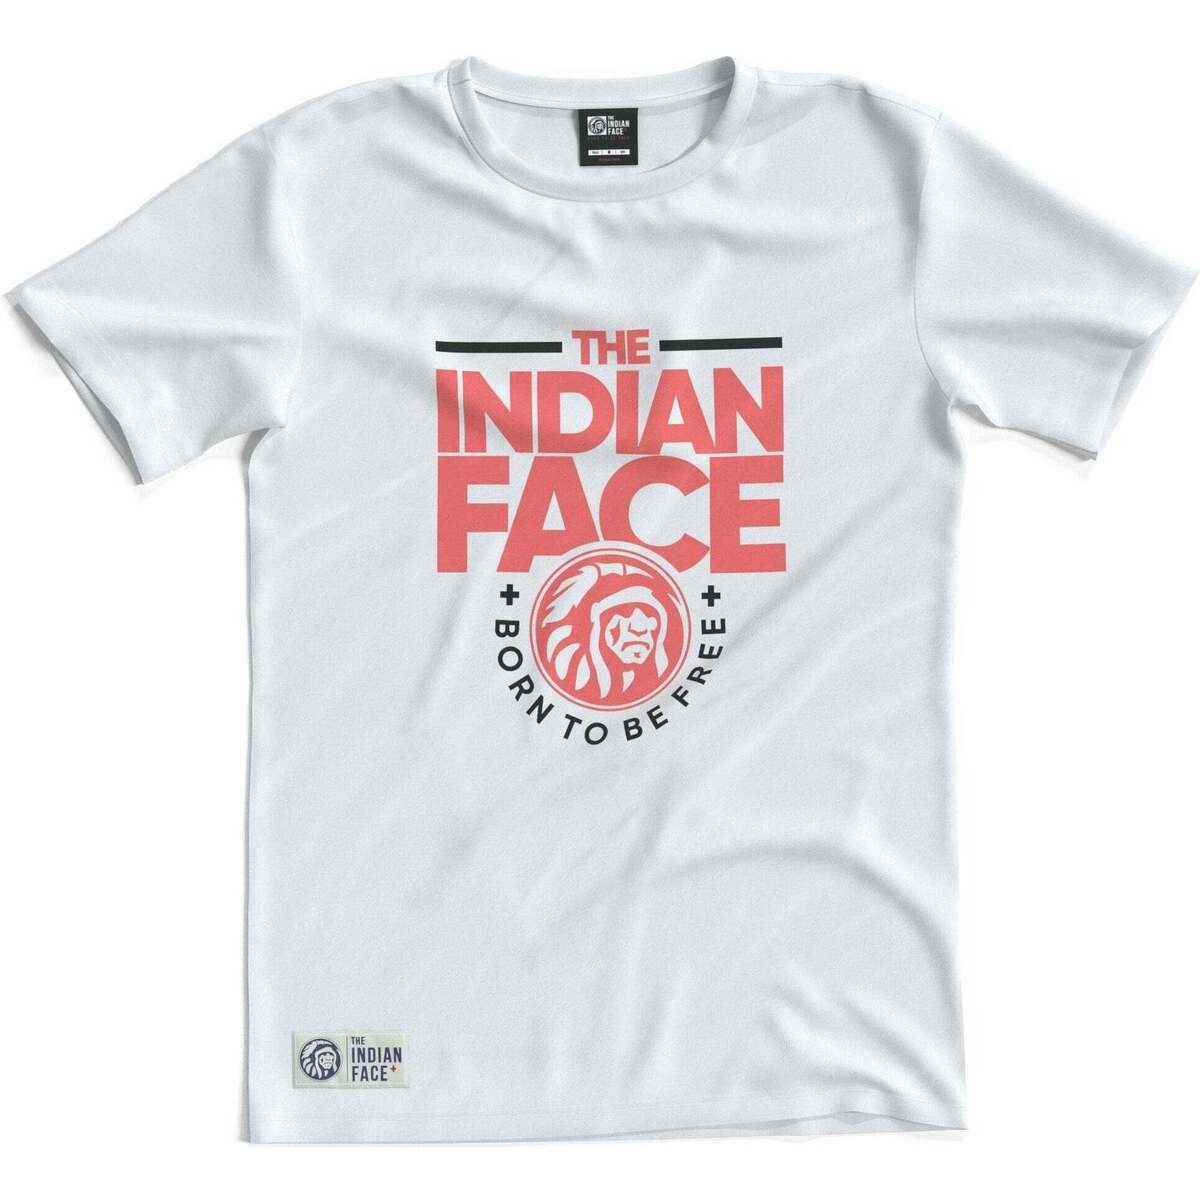 Womens White T-Shirt The Indian Face - Spartoo GOOFASH